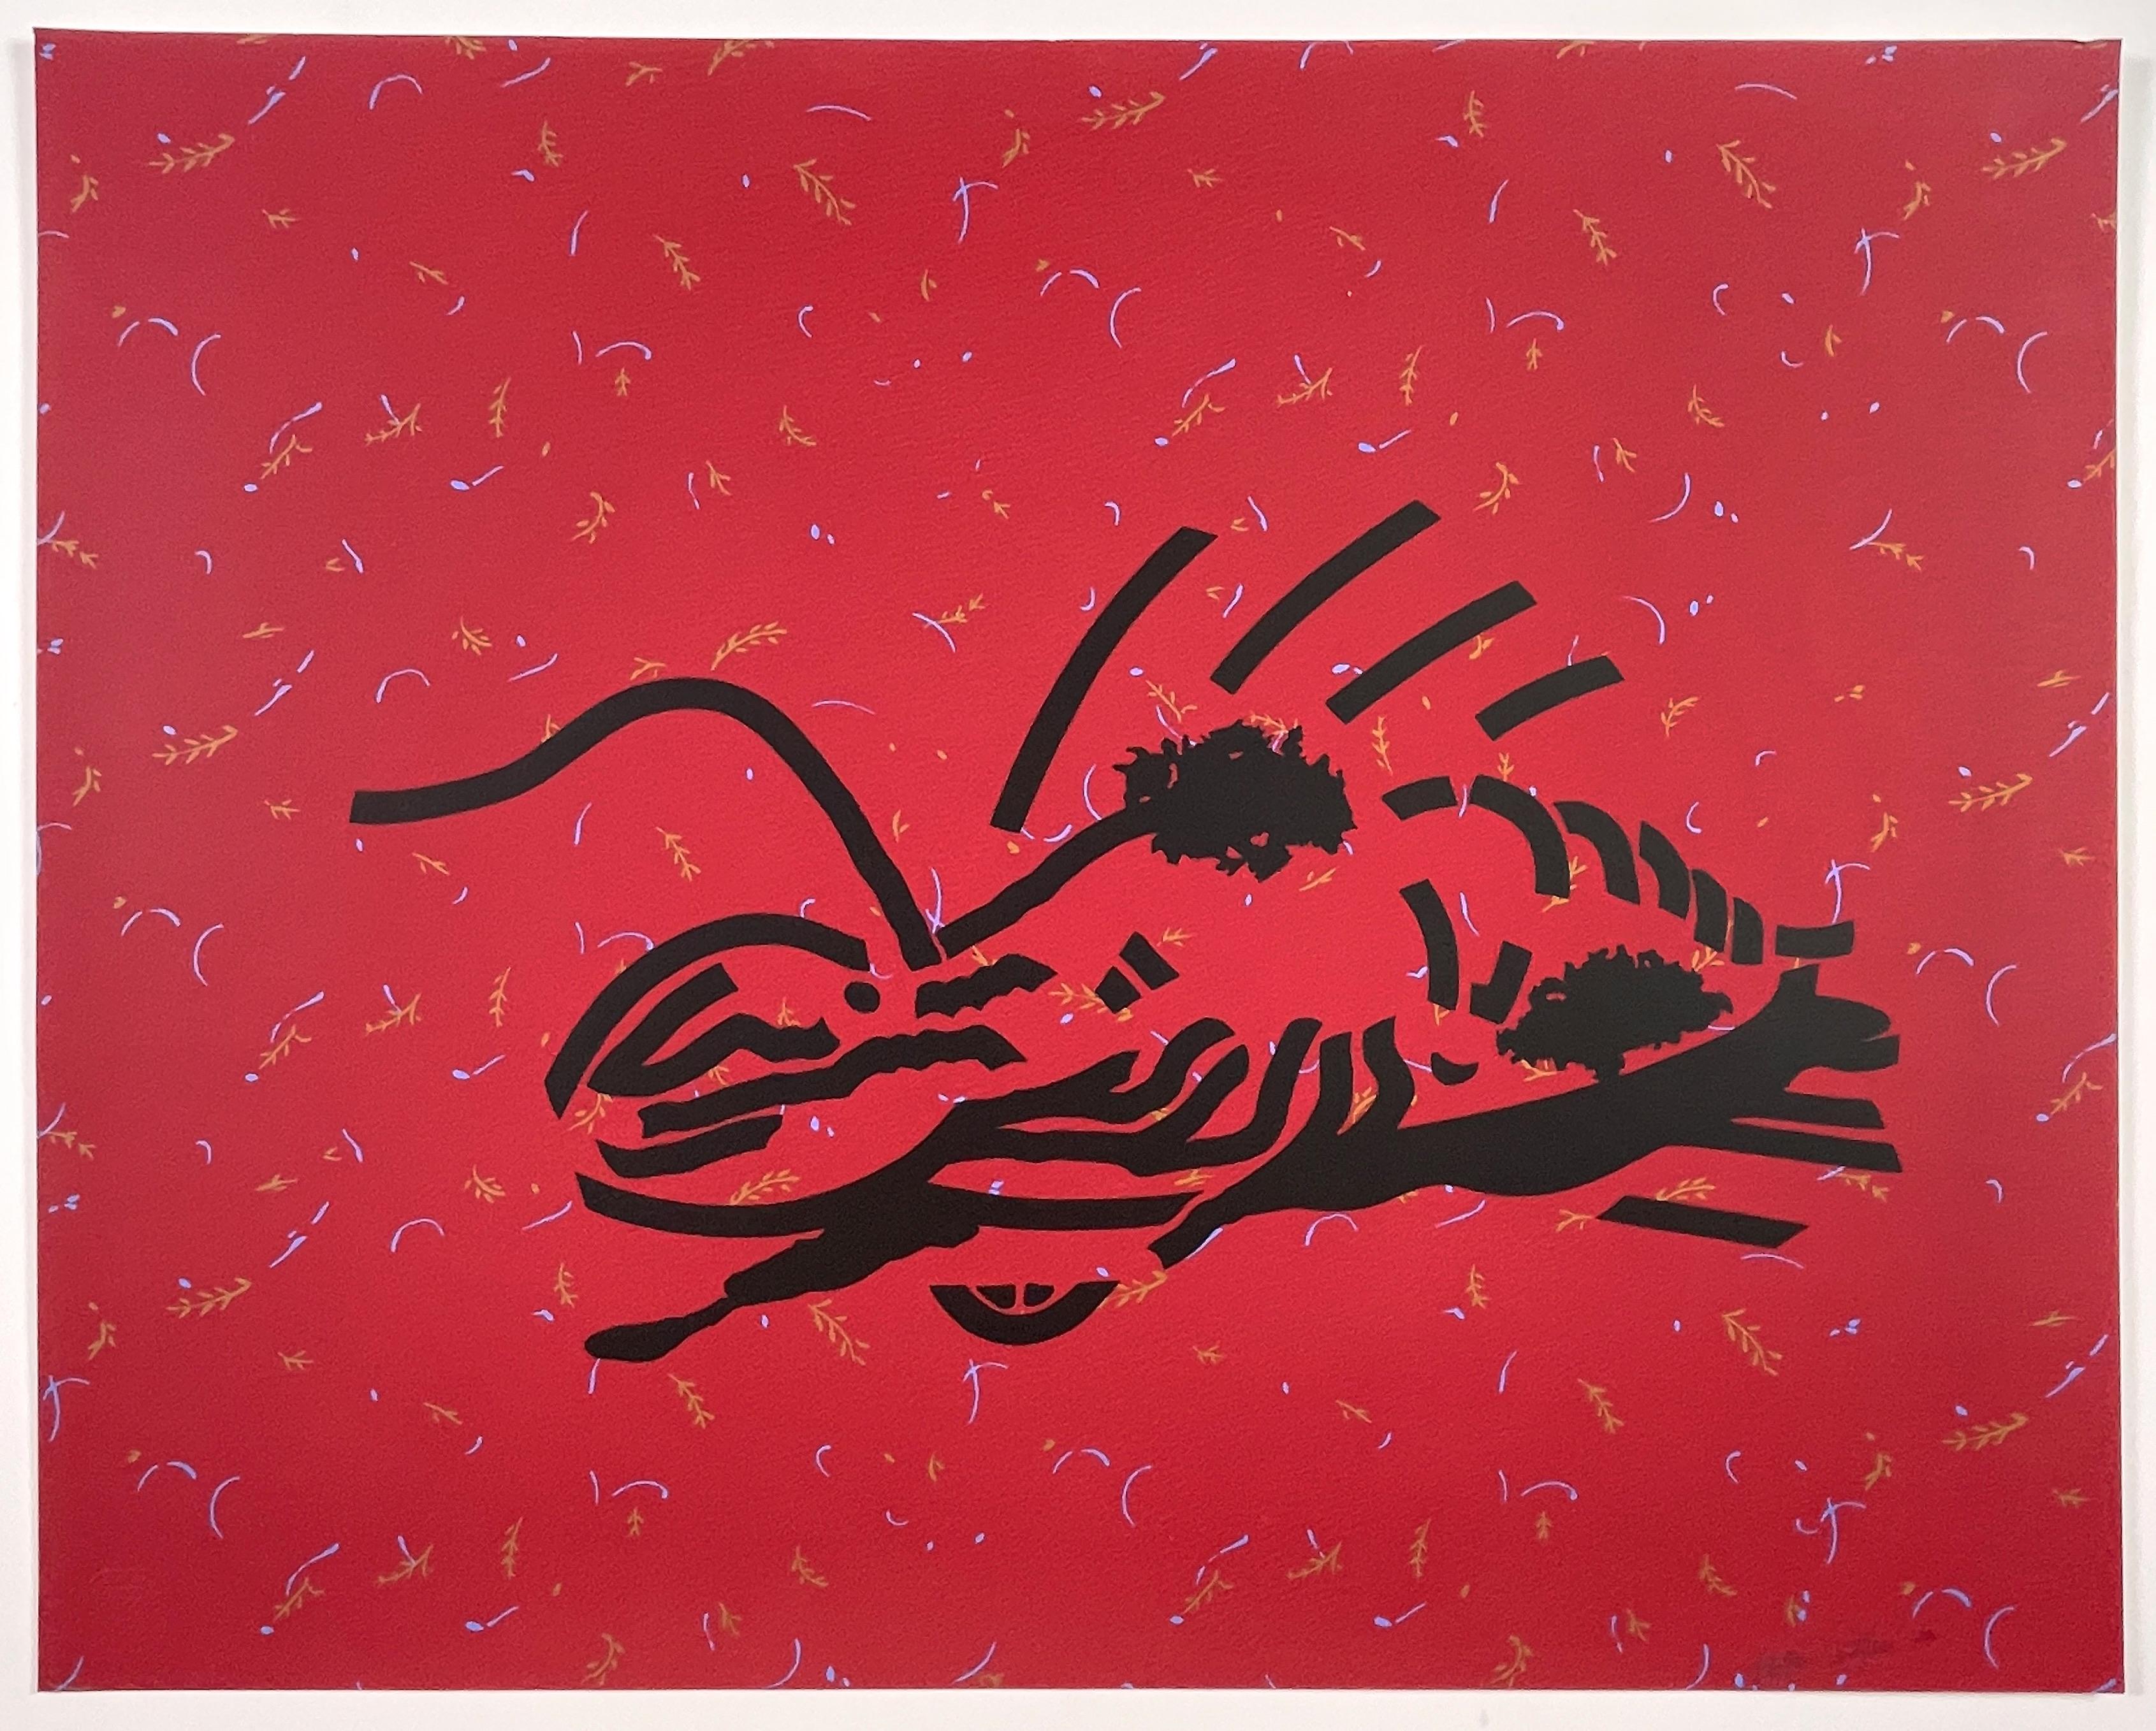 Patrick Caulfield's cheeky, Pop Art take on a seaside favorite, dressed lobster, abstracted in graphic black strokes atop a field of red decorated with tiny sprigs. Signed by the artist lower right in pencil. Embossed "K" chop lower left corner of